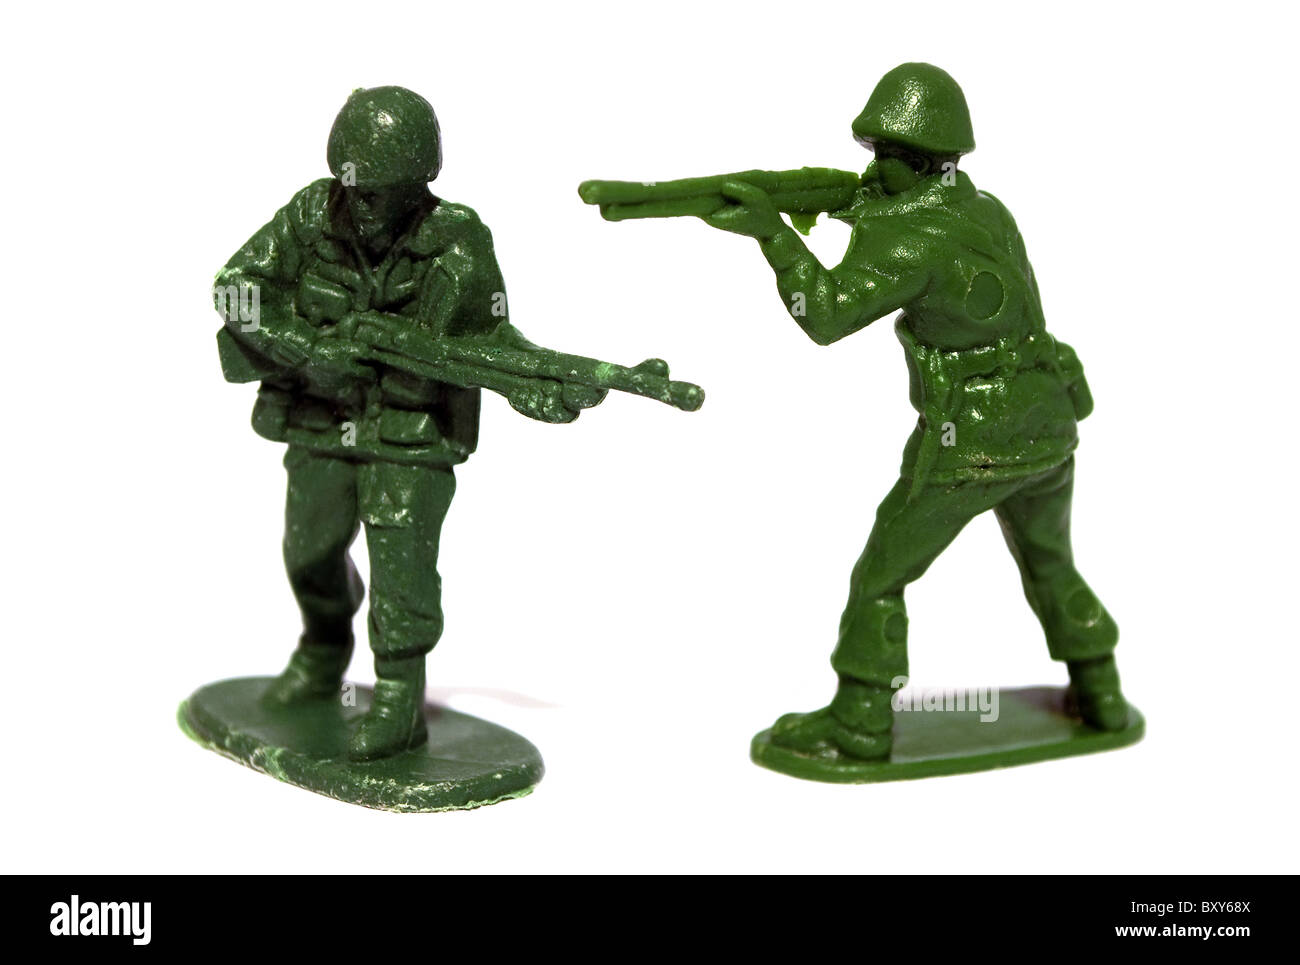 Toy Soldier Toys 88